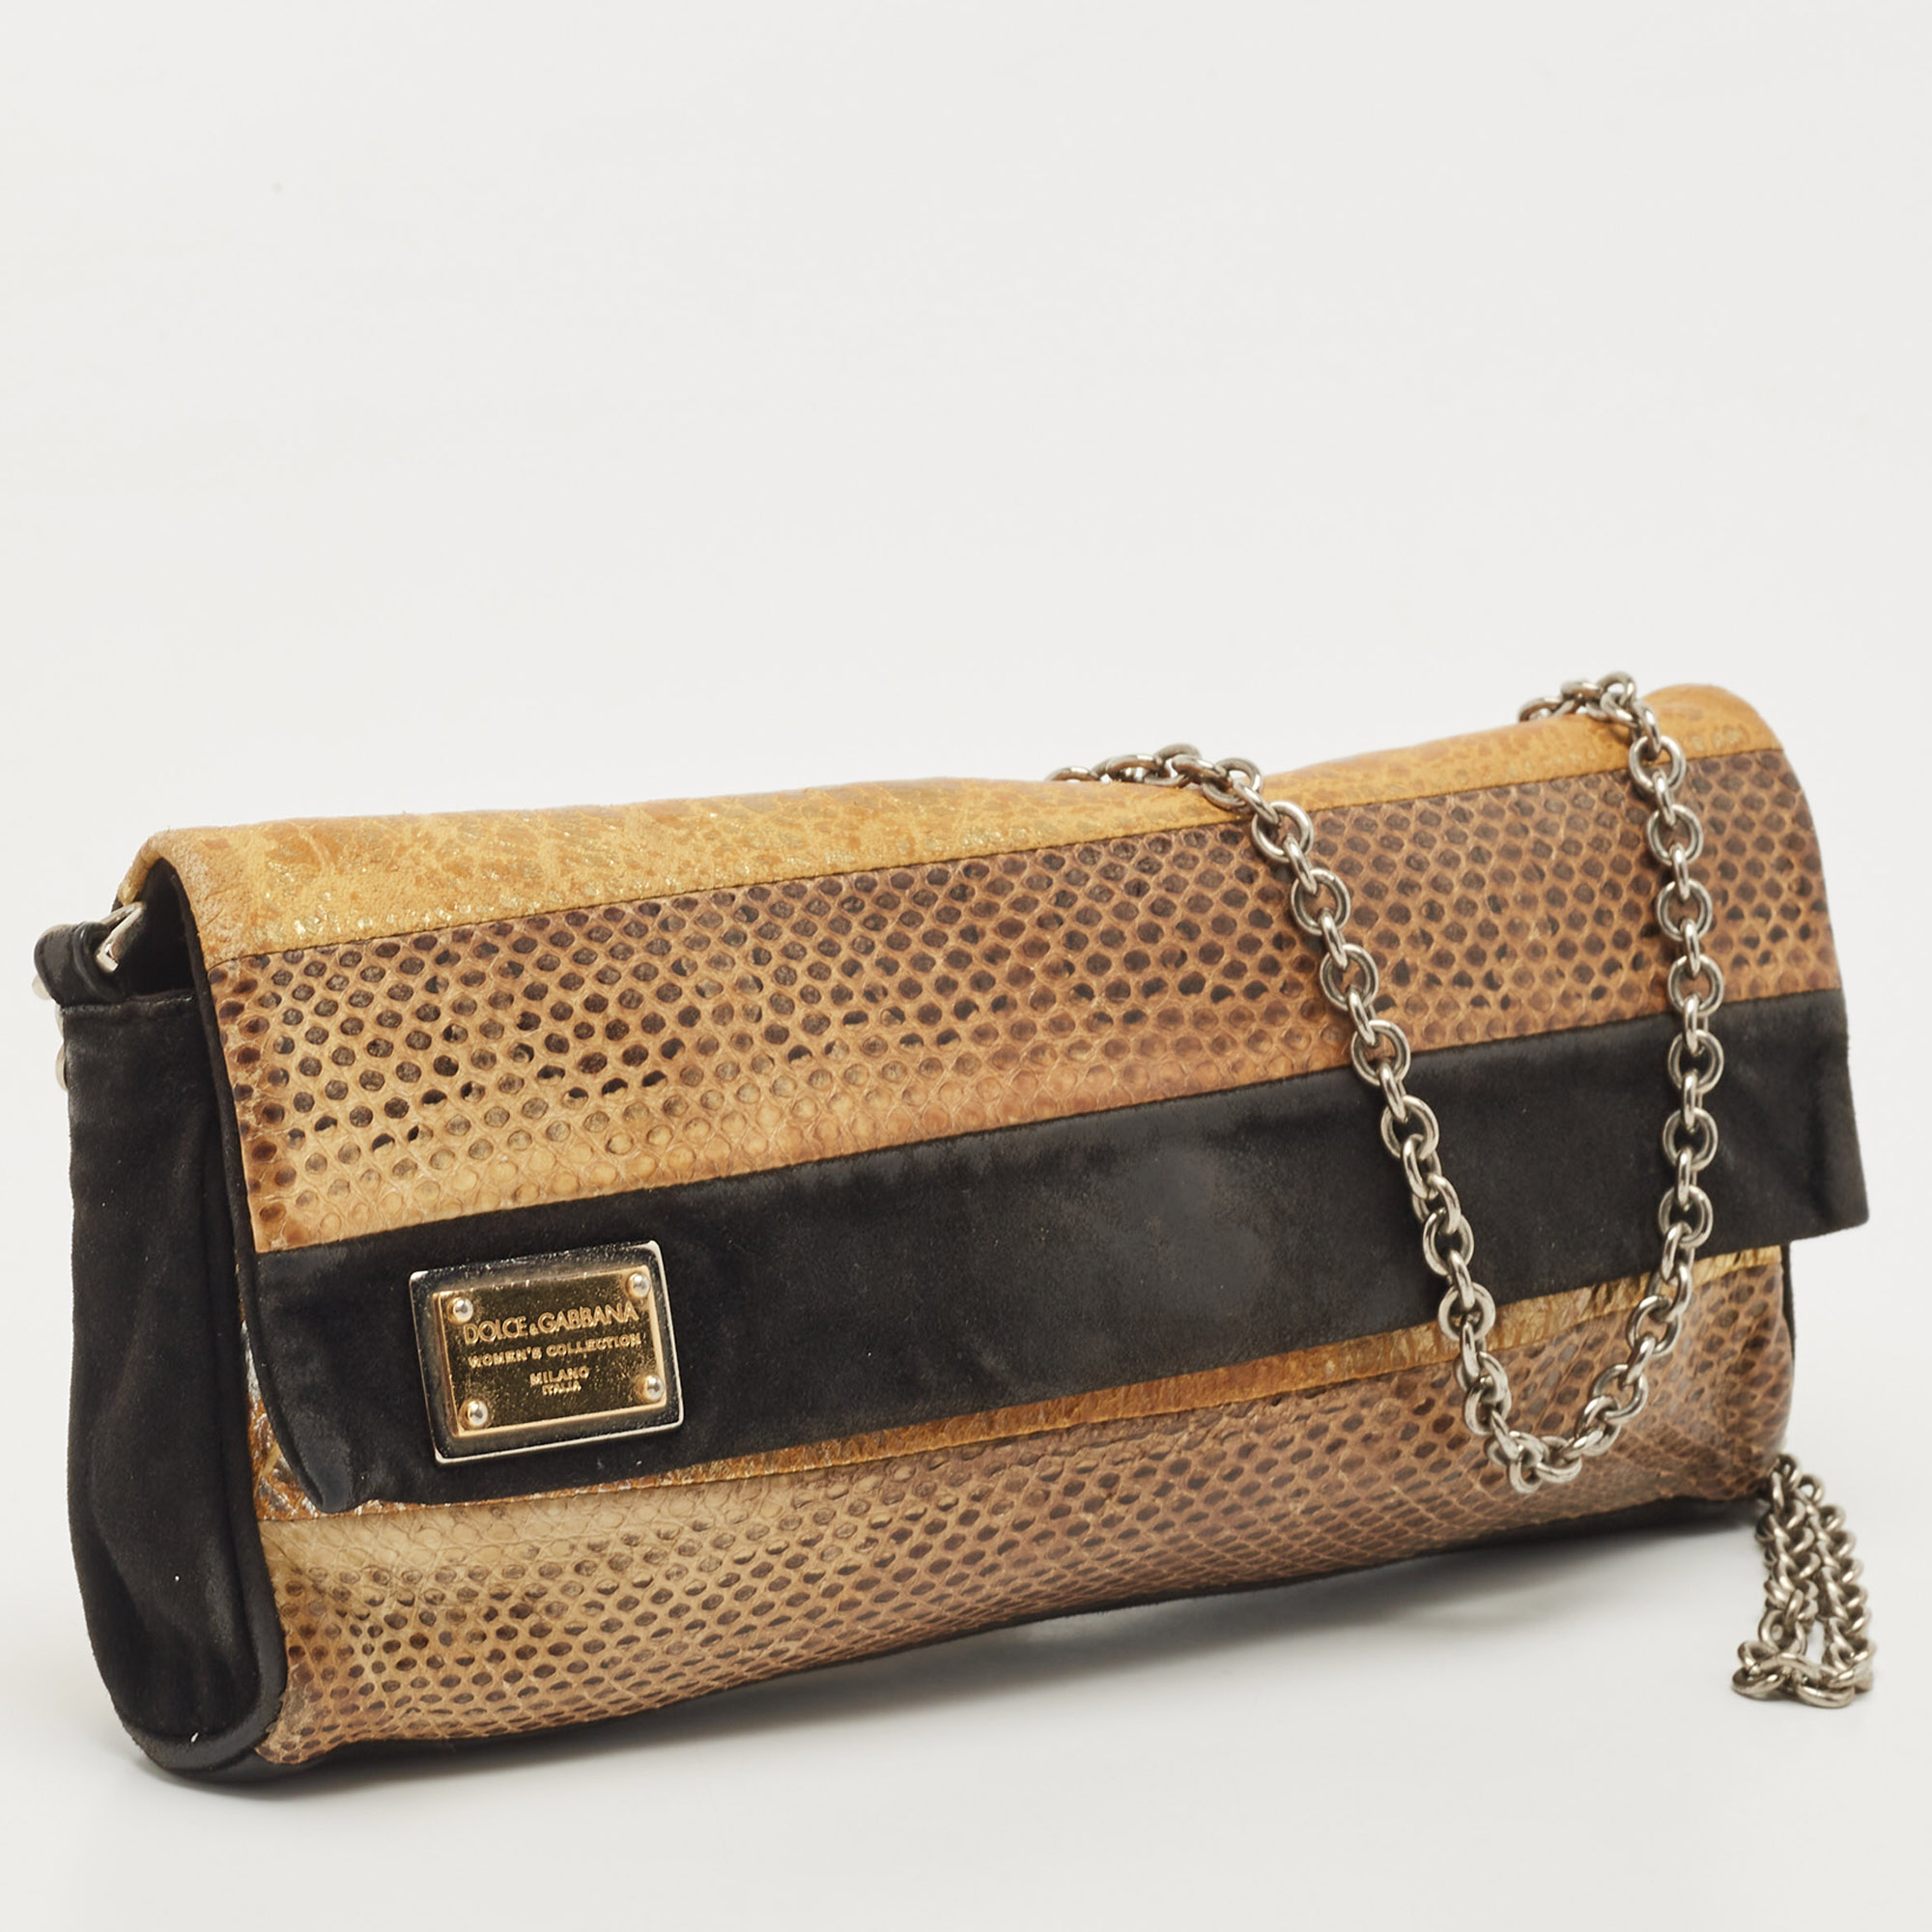 Dolce & Gabbana Black/Brown Suede And Snakeskin Leather Chain Clutch